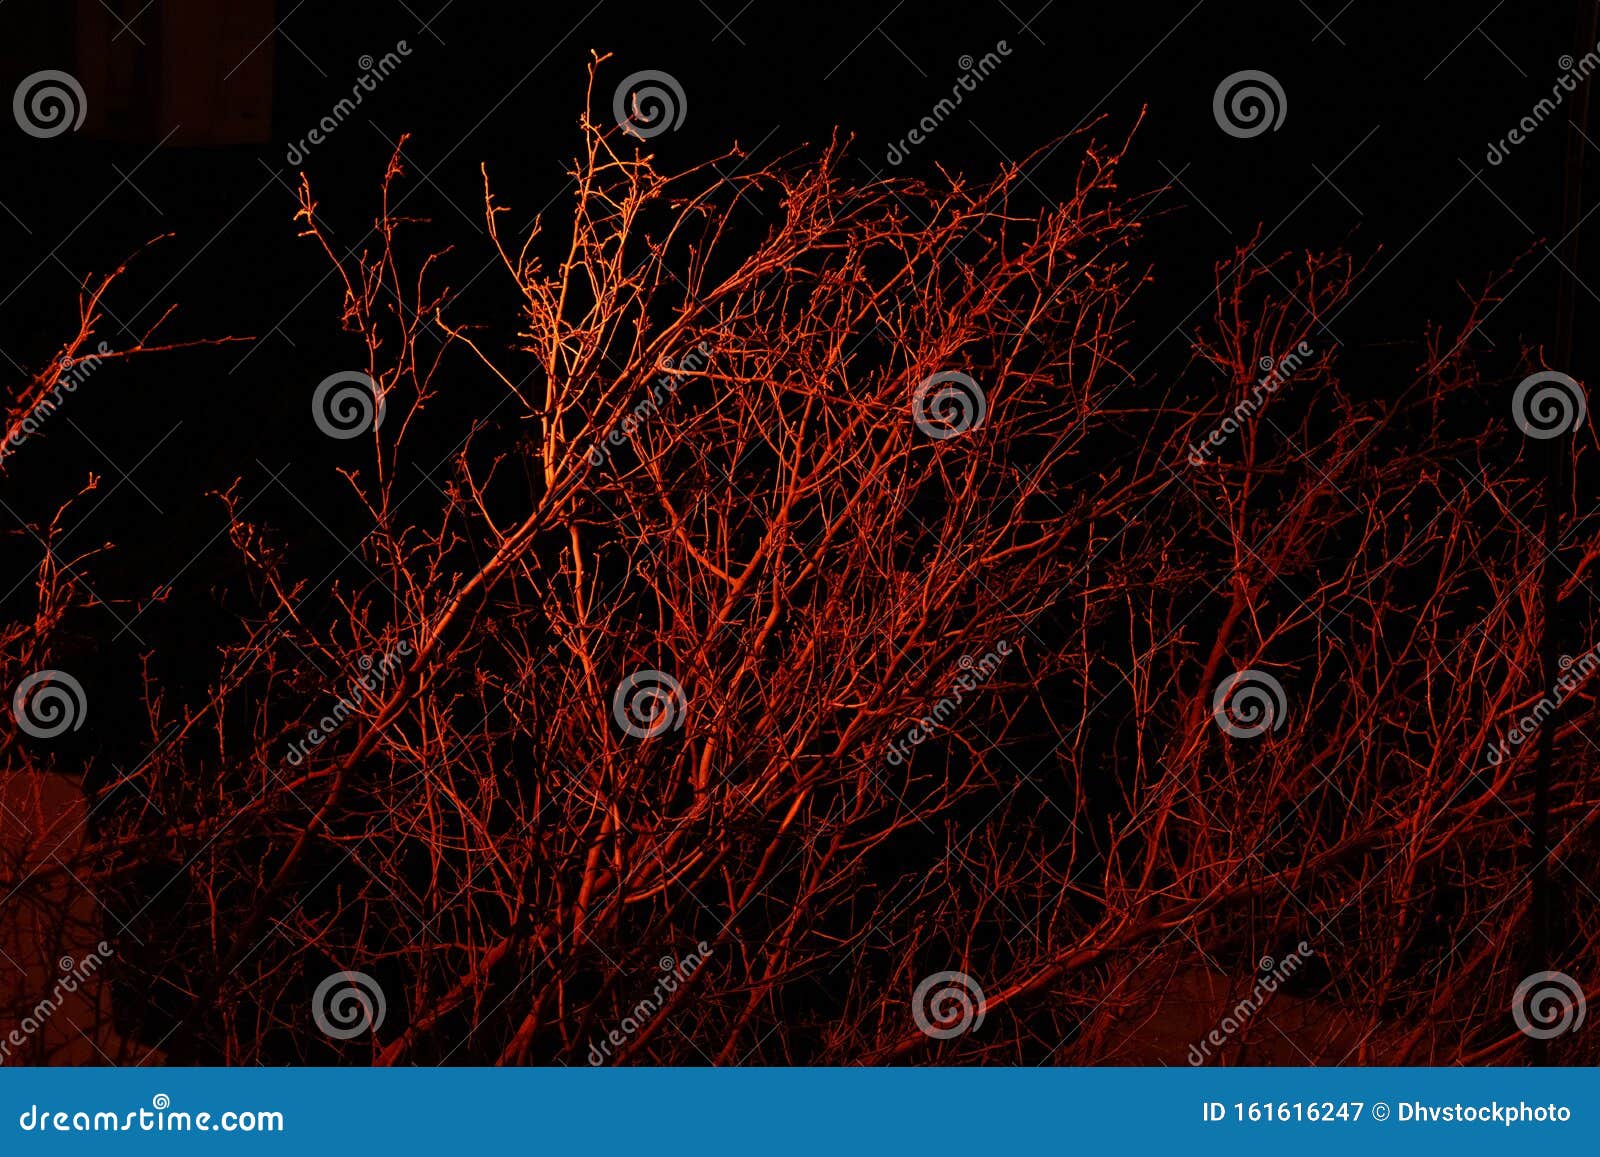 Creative Dramatic Concept of Branches Illuminated with Red Light, at